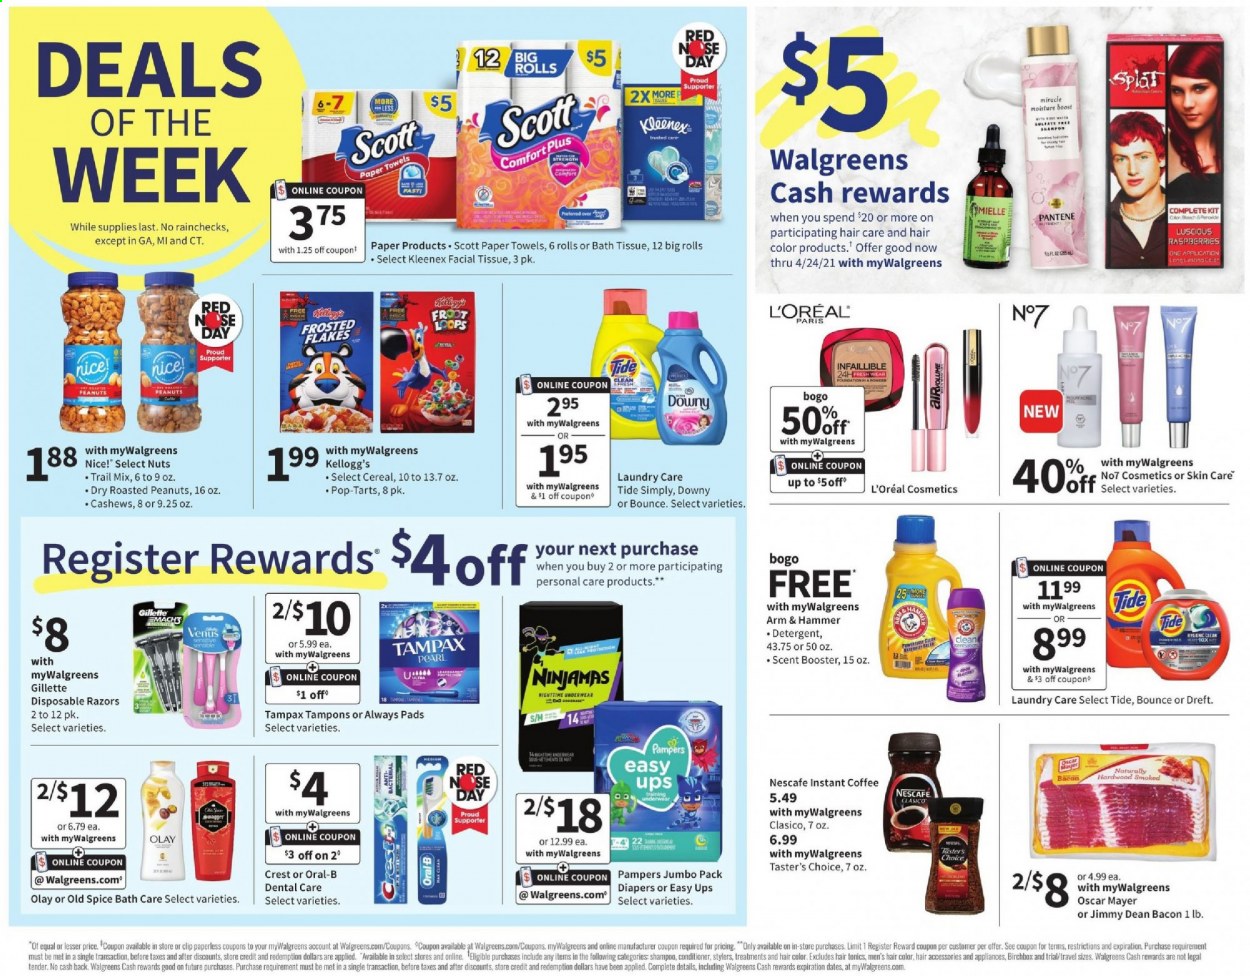 thumbnail - Walgreens Flyer - 04/04/2021 - 04/10/2021 - Sales products - Scott, Jimmy Dean, bacon, Oscar Mayer, Kellogg's, Pop-Tarts, Nice!, ARM & HAMMER, cereals, cashews, roasted peanuts, peanuts, dried dates, instant coffee, Nescafé, Pampers, nappies, bath tissue, Kleenex, kitchen towels, paper towels, detergent, Tide, Bounce, Old Spice, Oral-B, Crest, Tampax, Always pads, tampons, L’Oréal, Olay, conditioner, Pantene, hair color, Mielle, Gillette, disposable razor. Page 2.